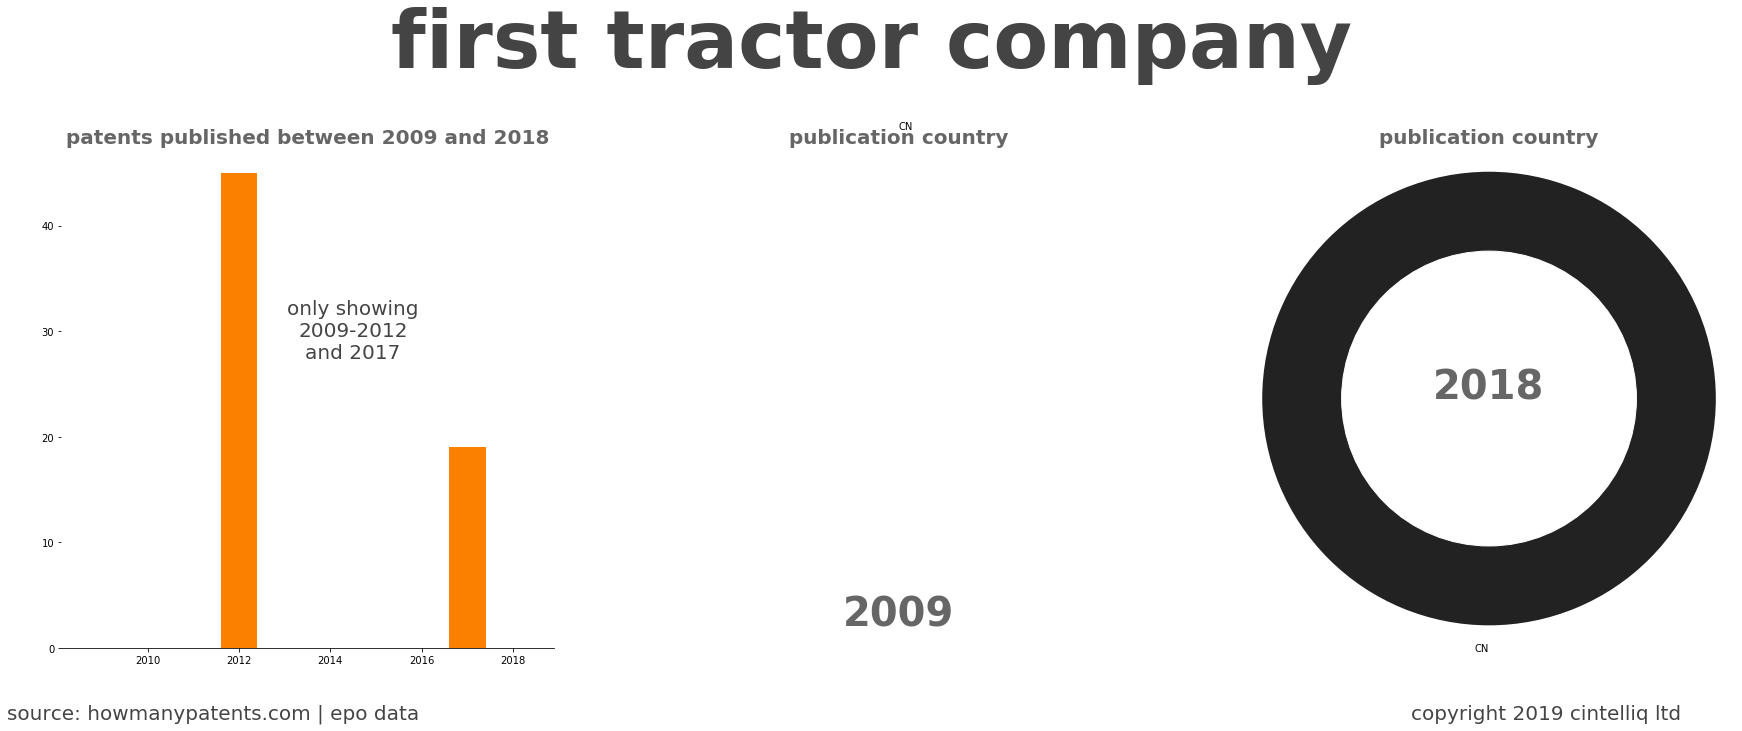 summary of patents for First Tractor Company